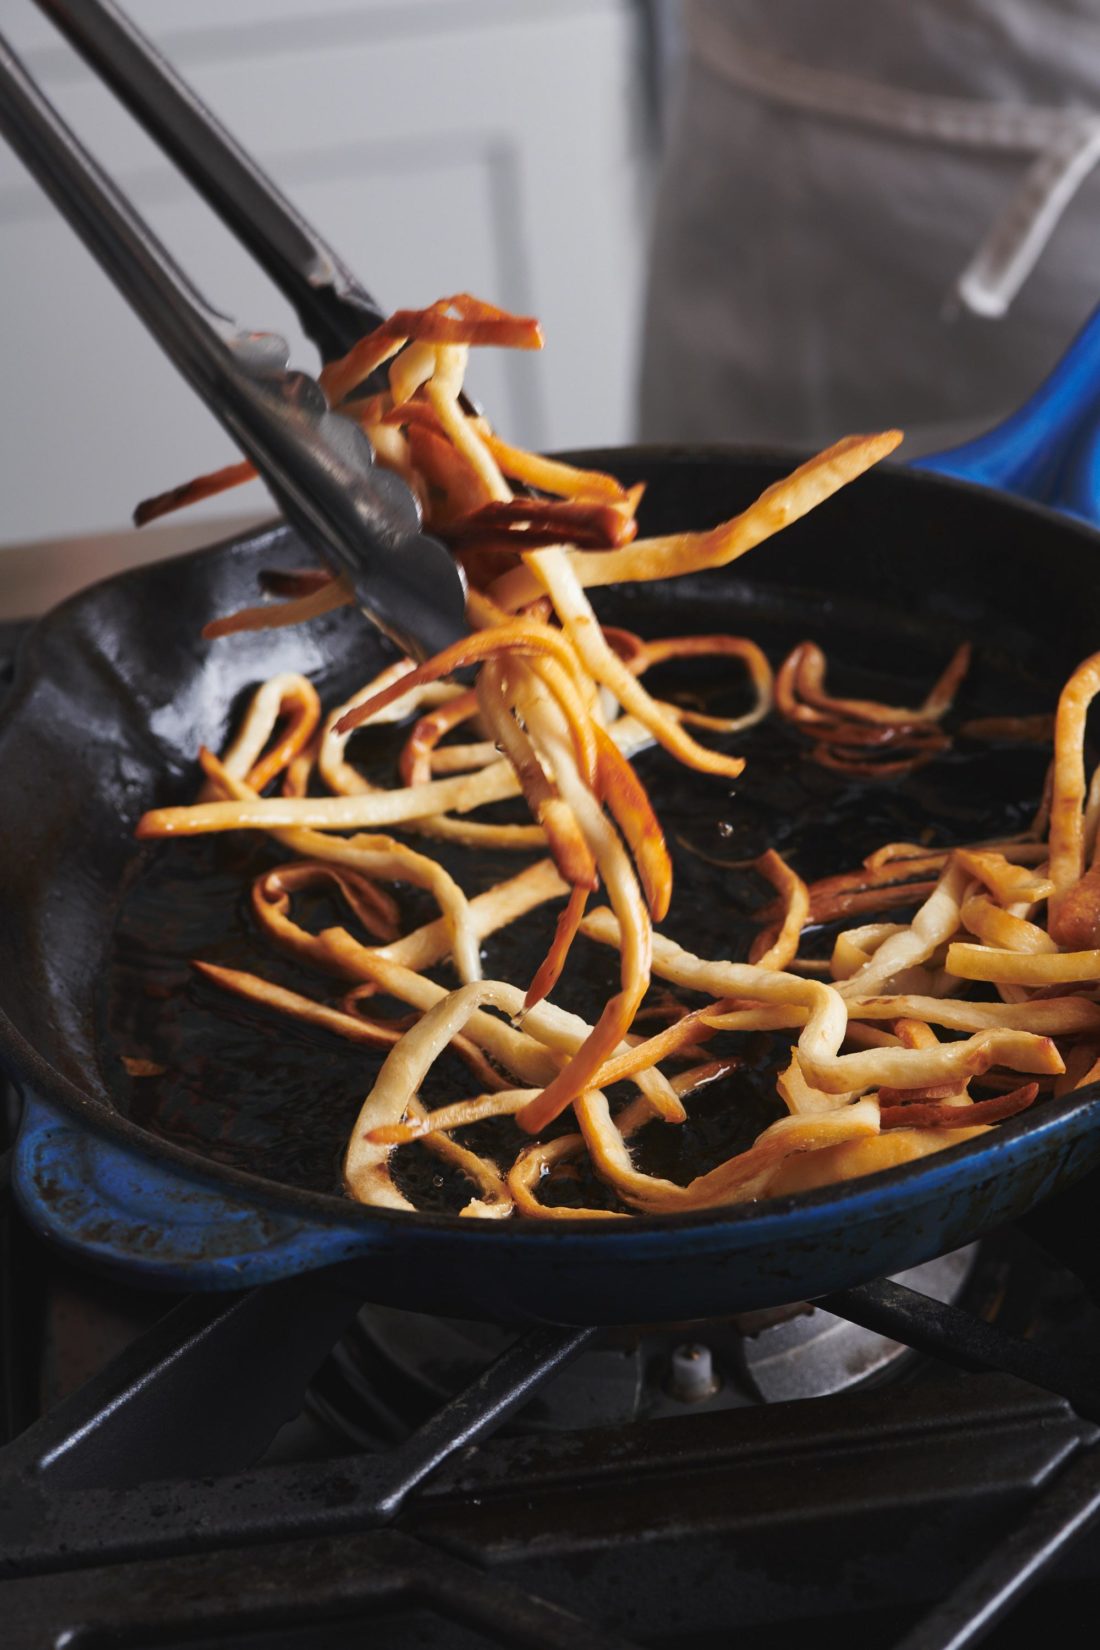 Tongs tossing tortilla strips in a skillet.